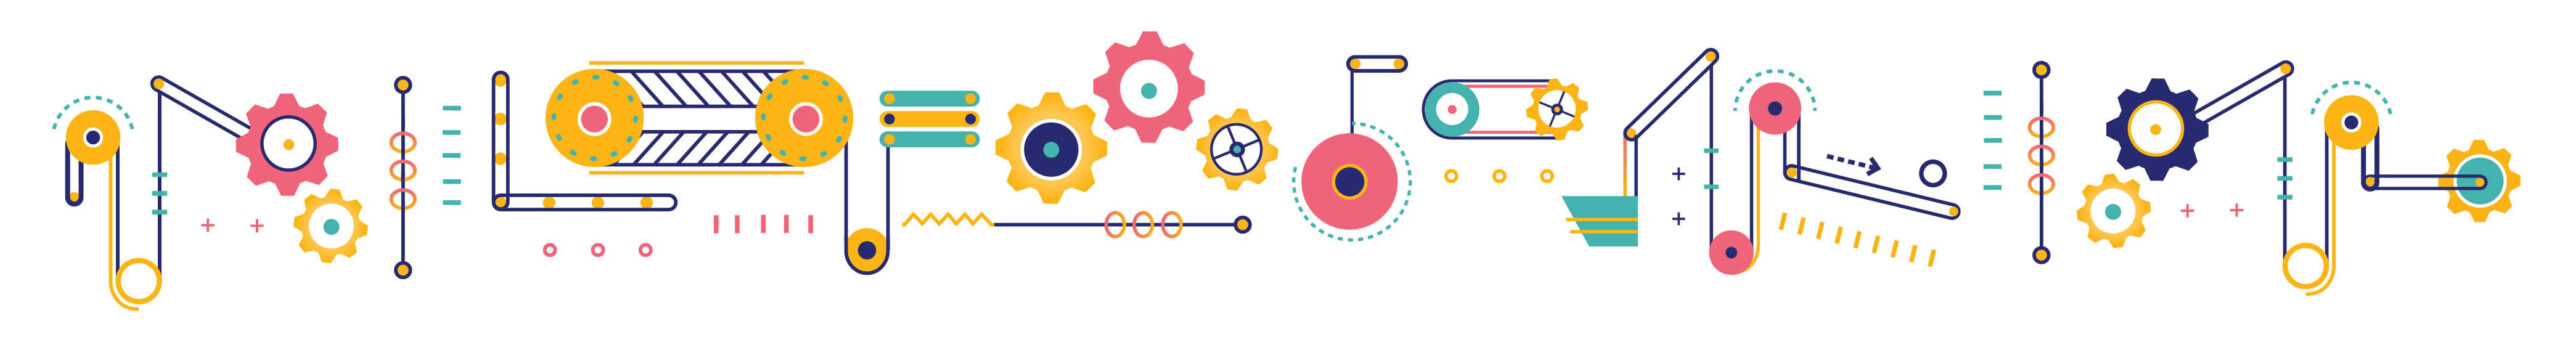 A colorfully illustrated design in bright teals, yellows, and pinks, that show interconnected gears and pulleys leading to a lightbulb.